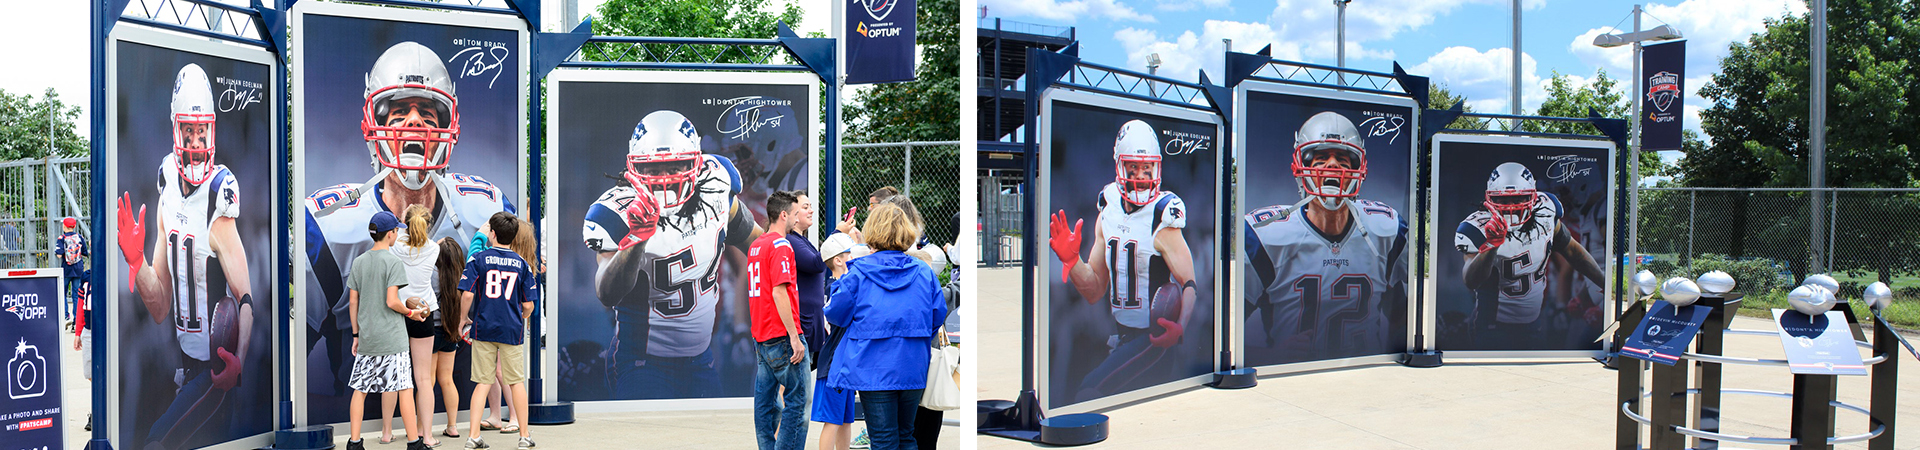 Tri-panel banner displays outside of an NFL game with player photo graphics.